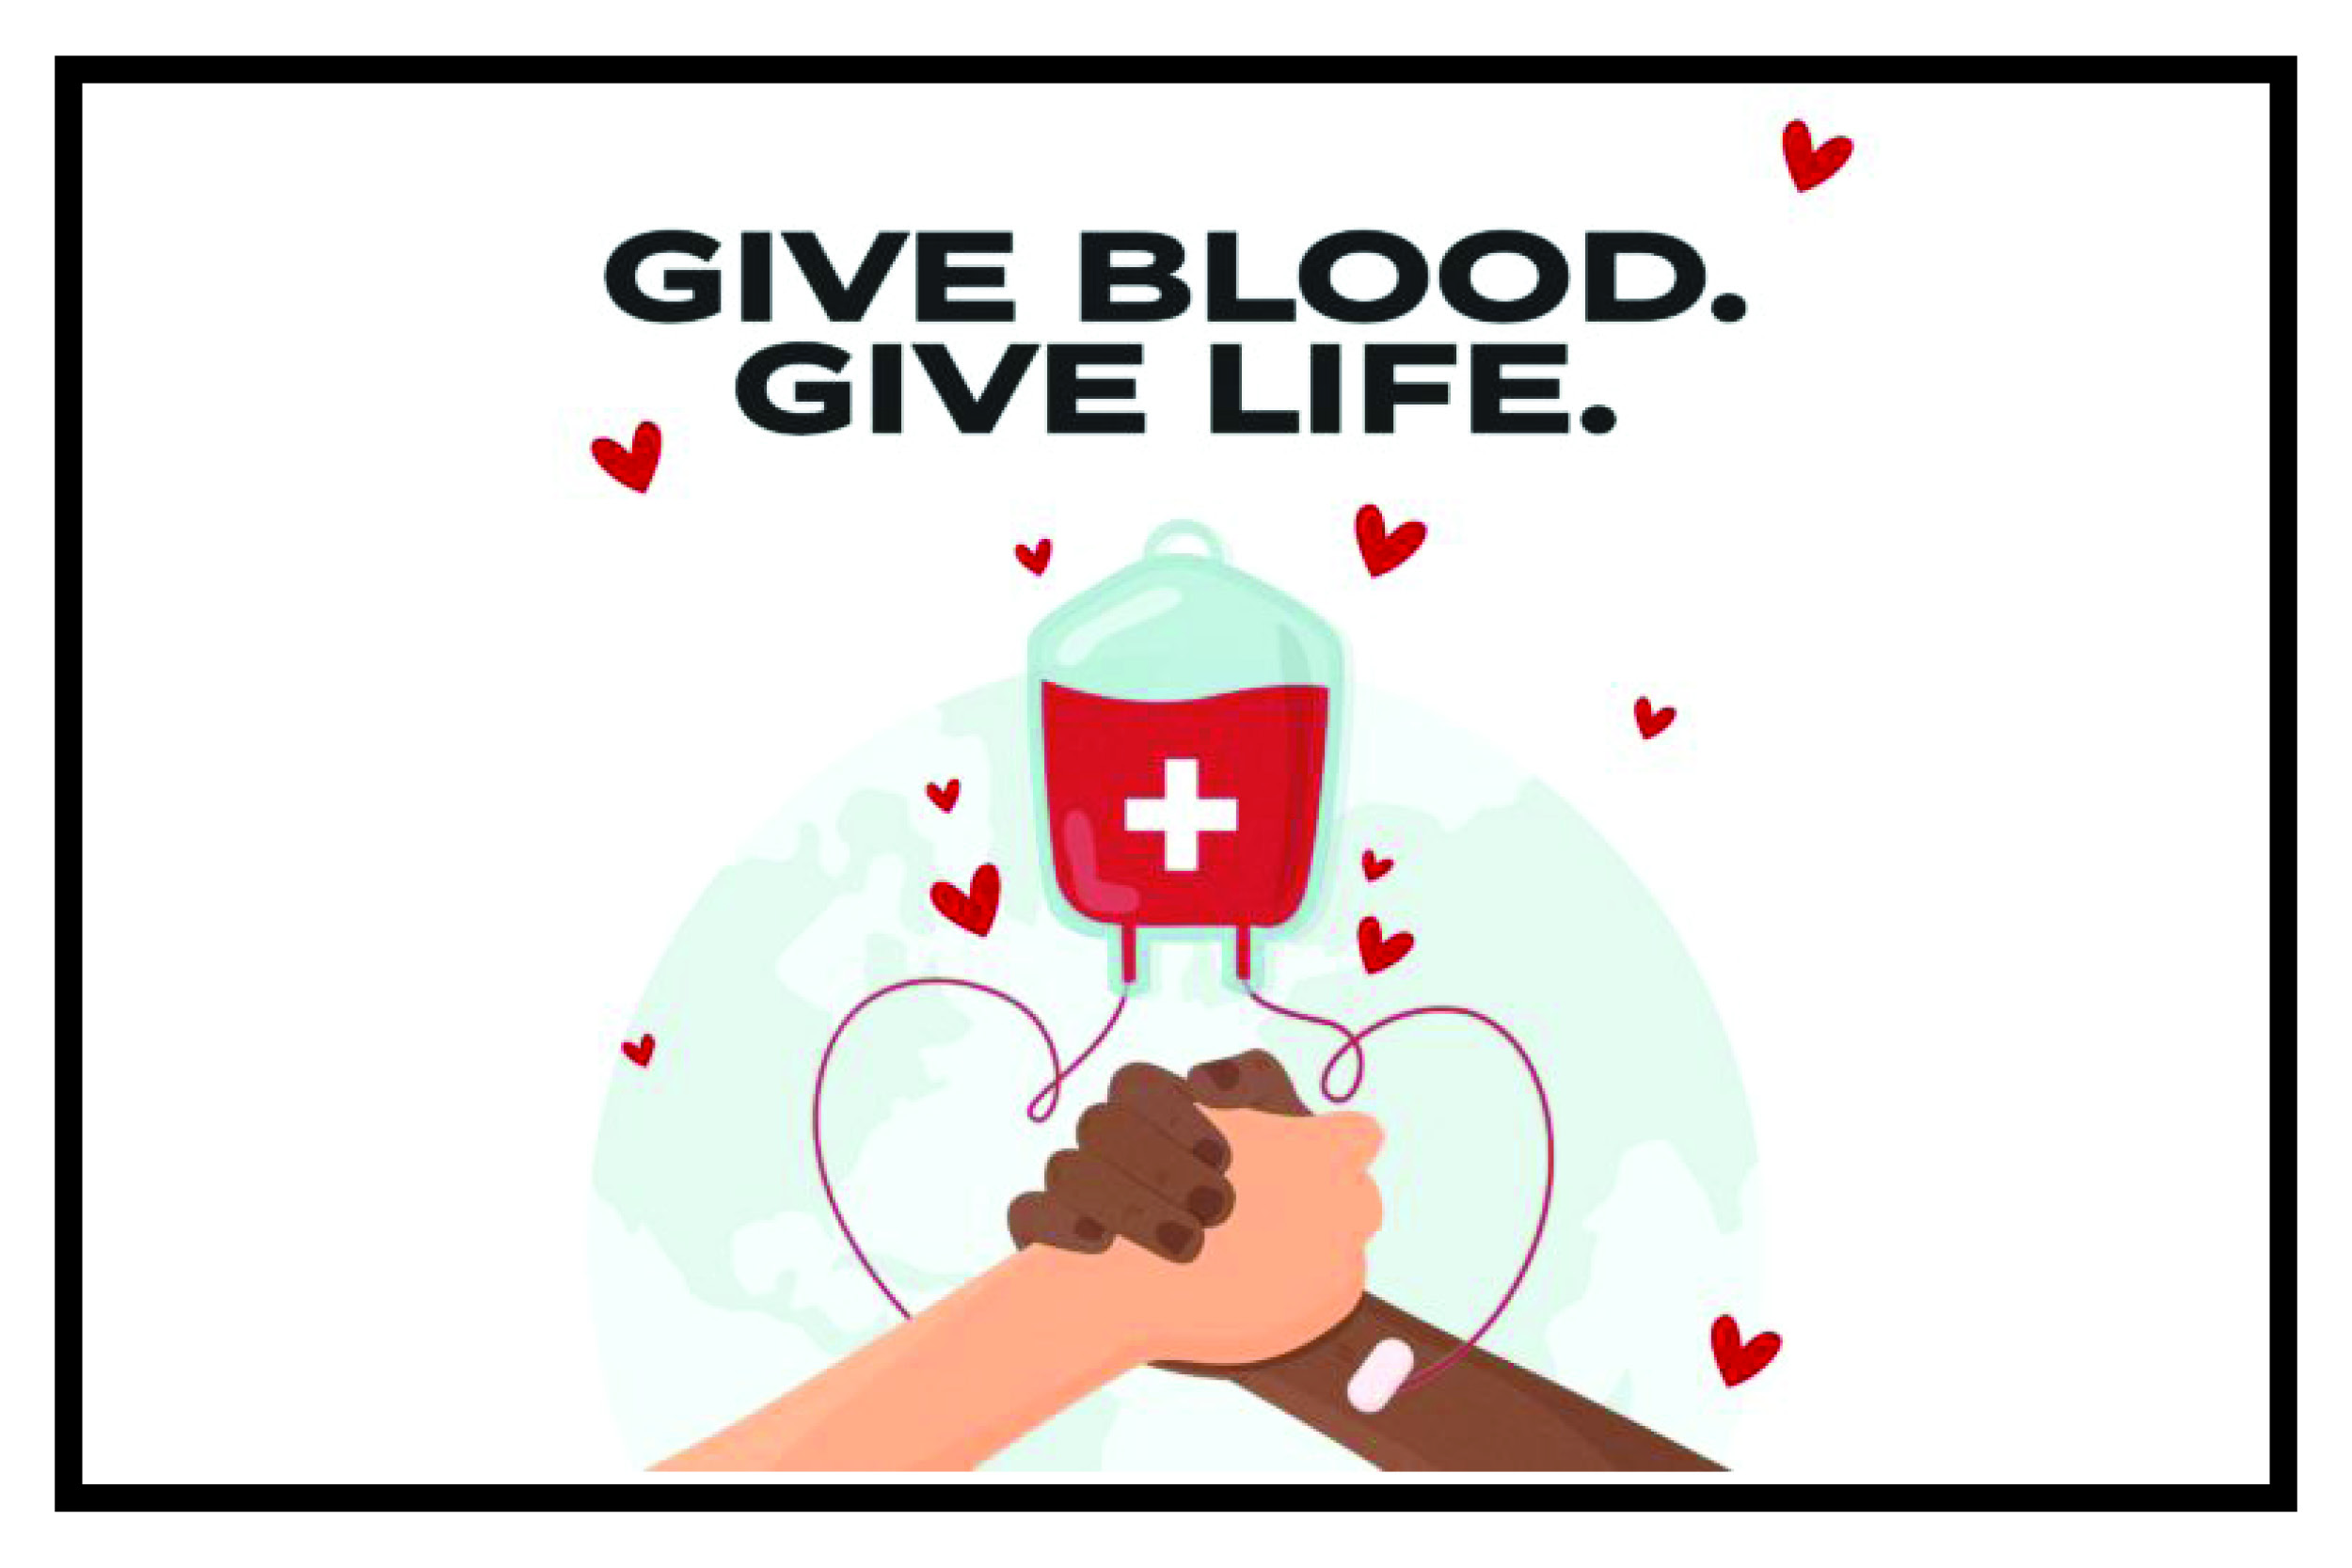 Seven Meadows Blood Drive - July 29th